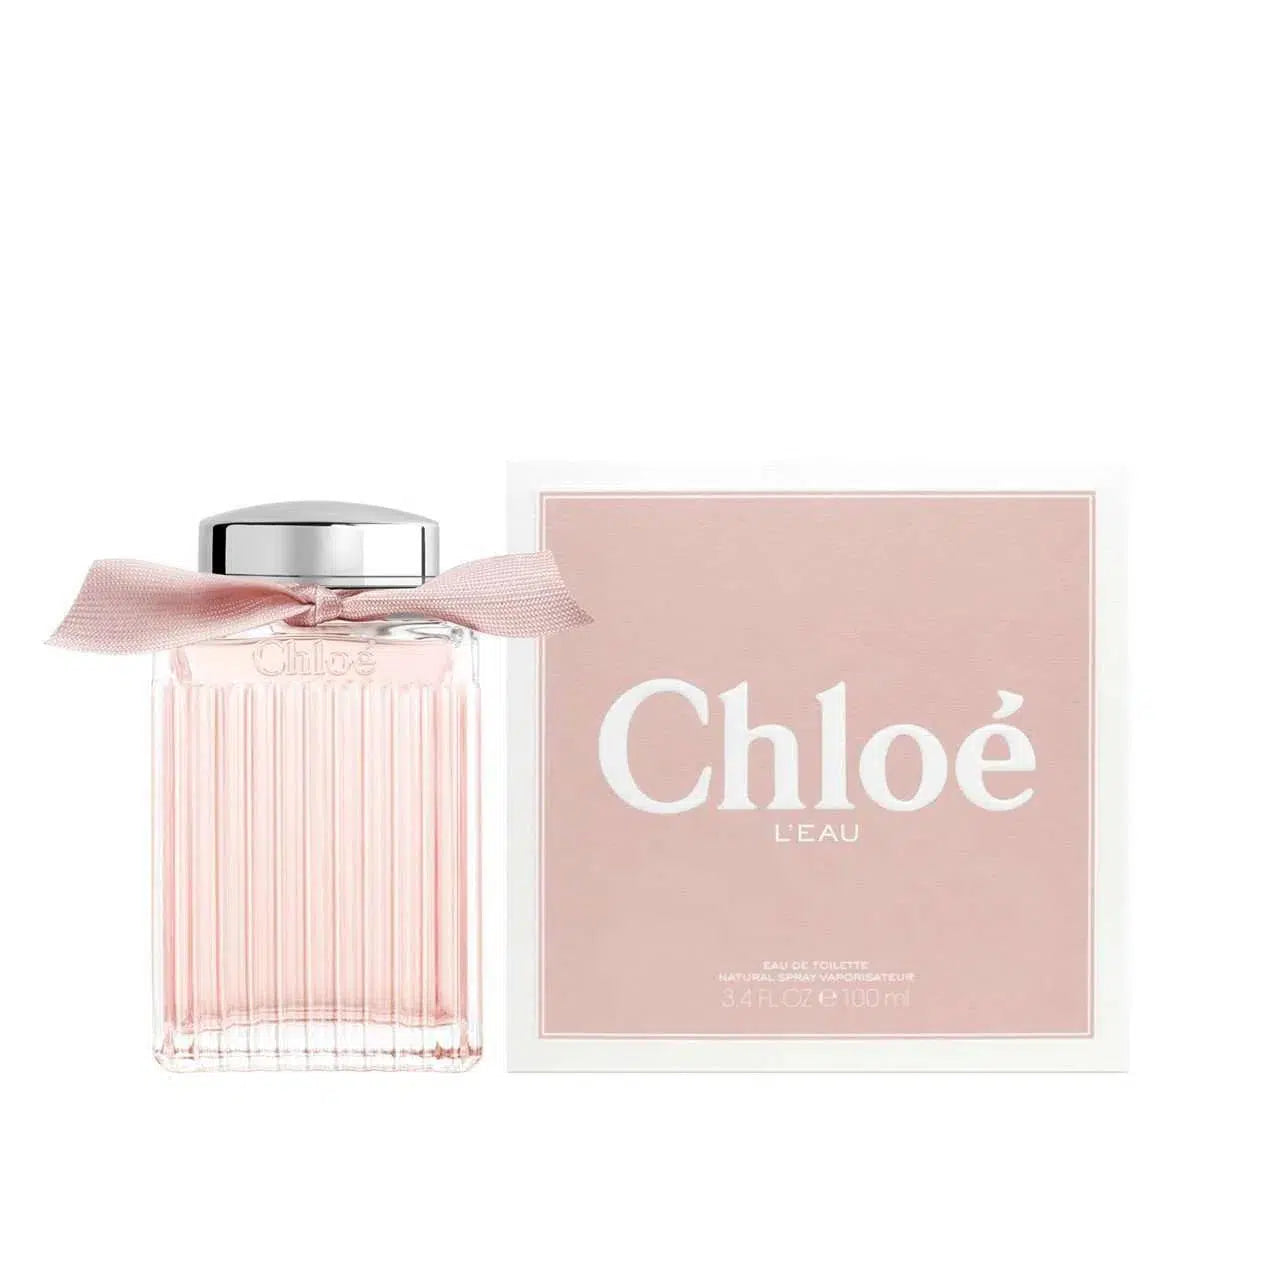 Buy Chloe Leau EDT 100ml for P4595.00 Only!